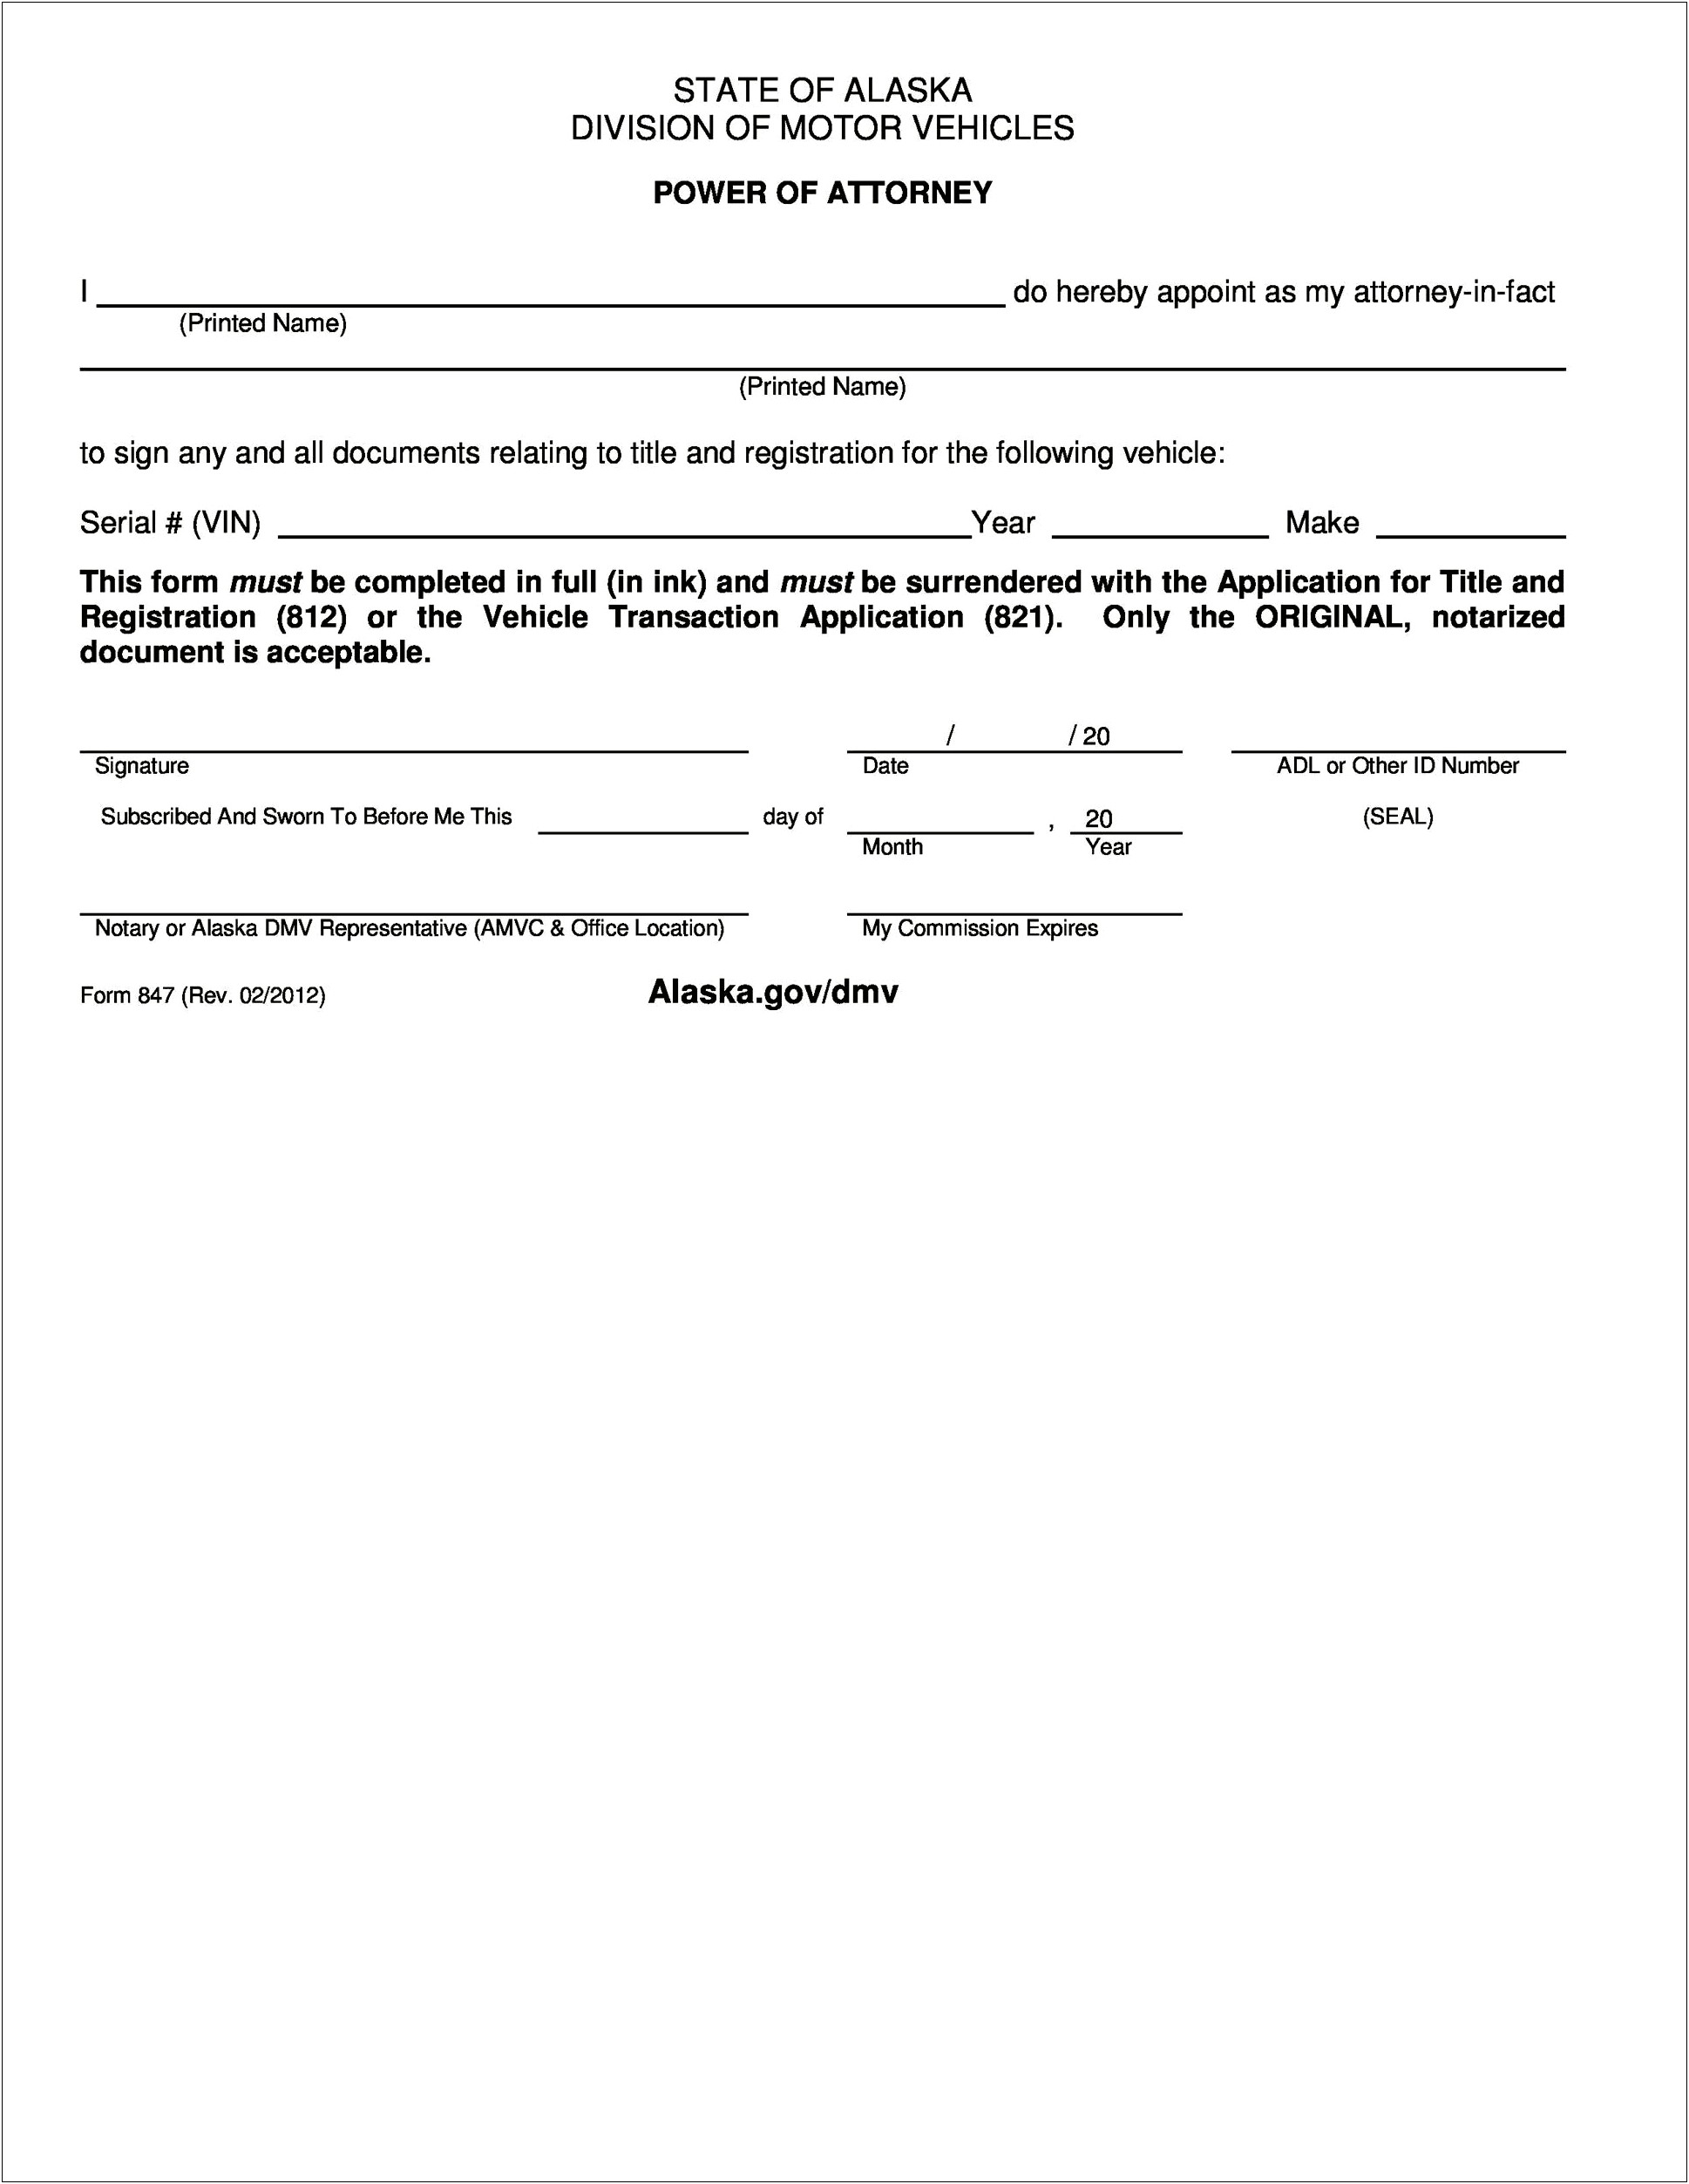 Free Template For Power Of Attorney Sample Templates : Resume Designs